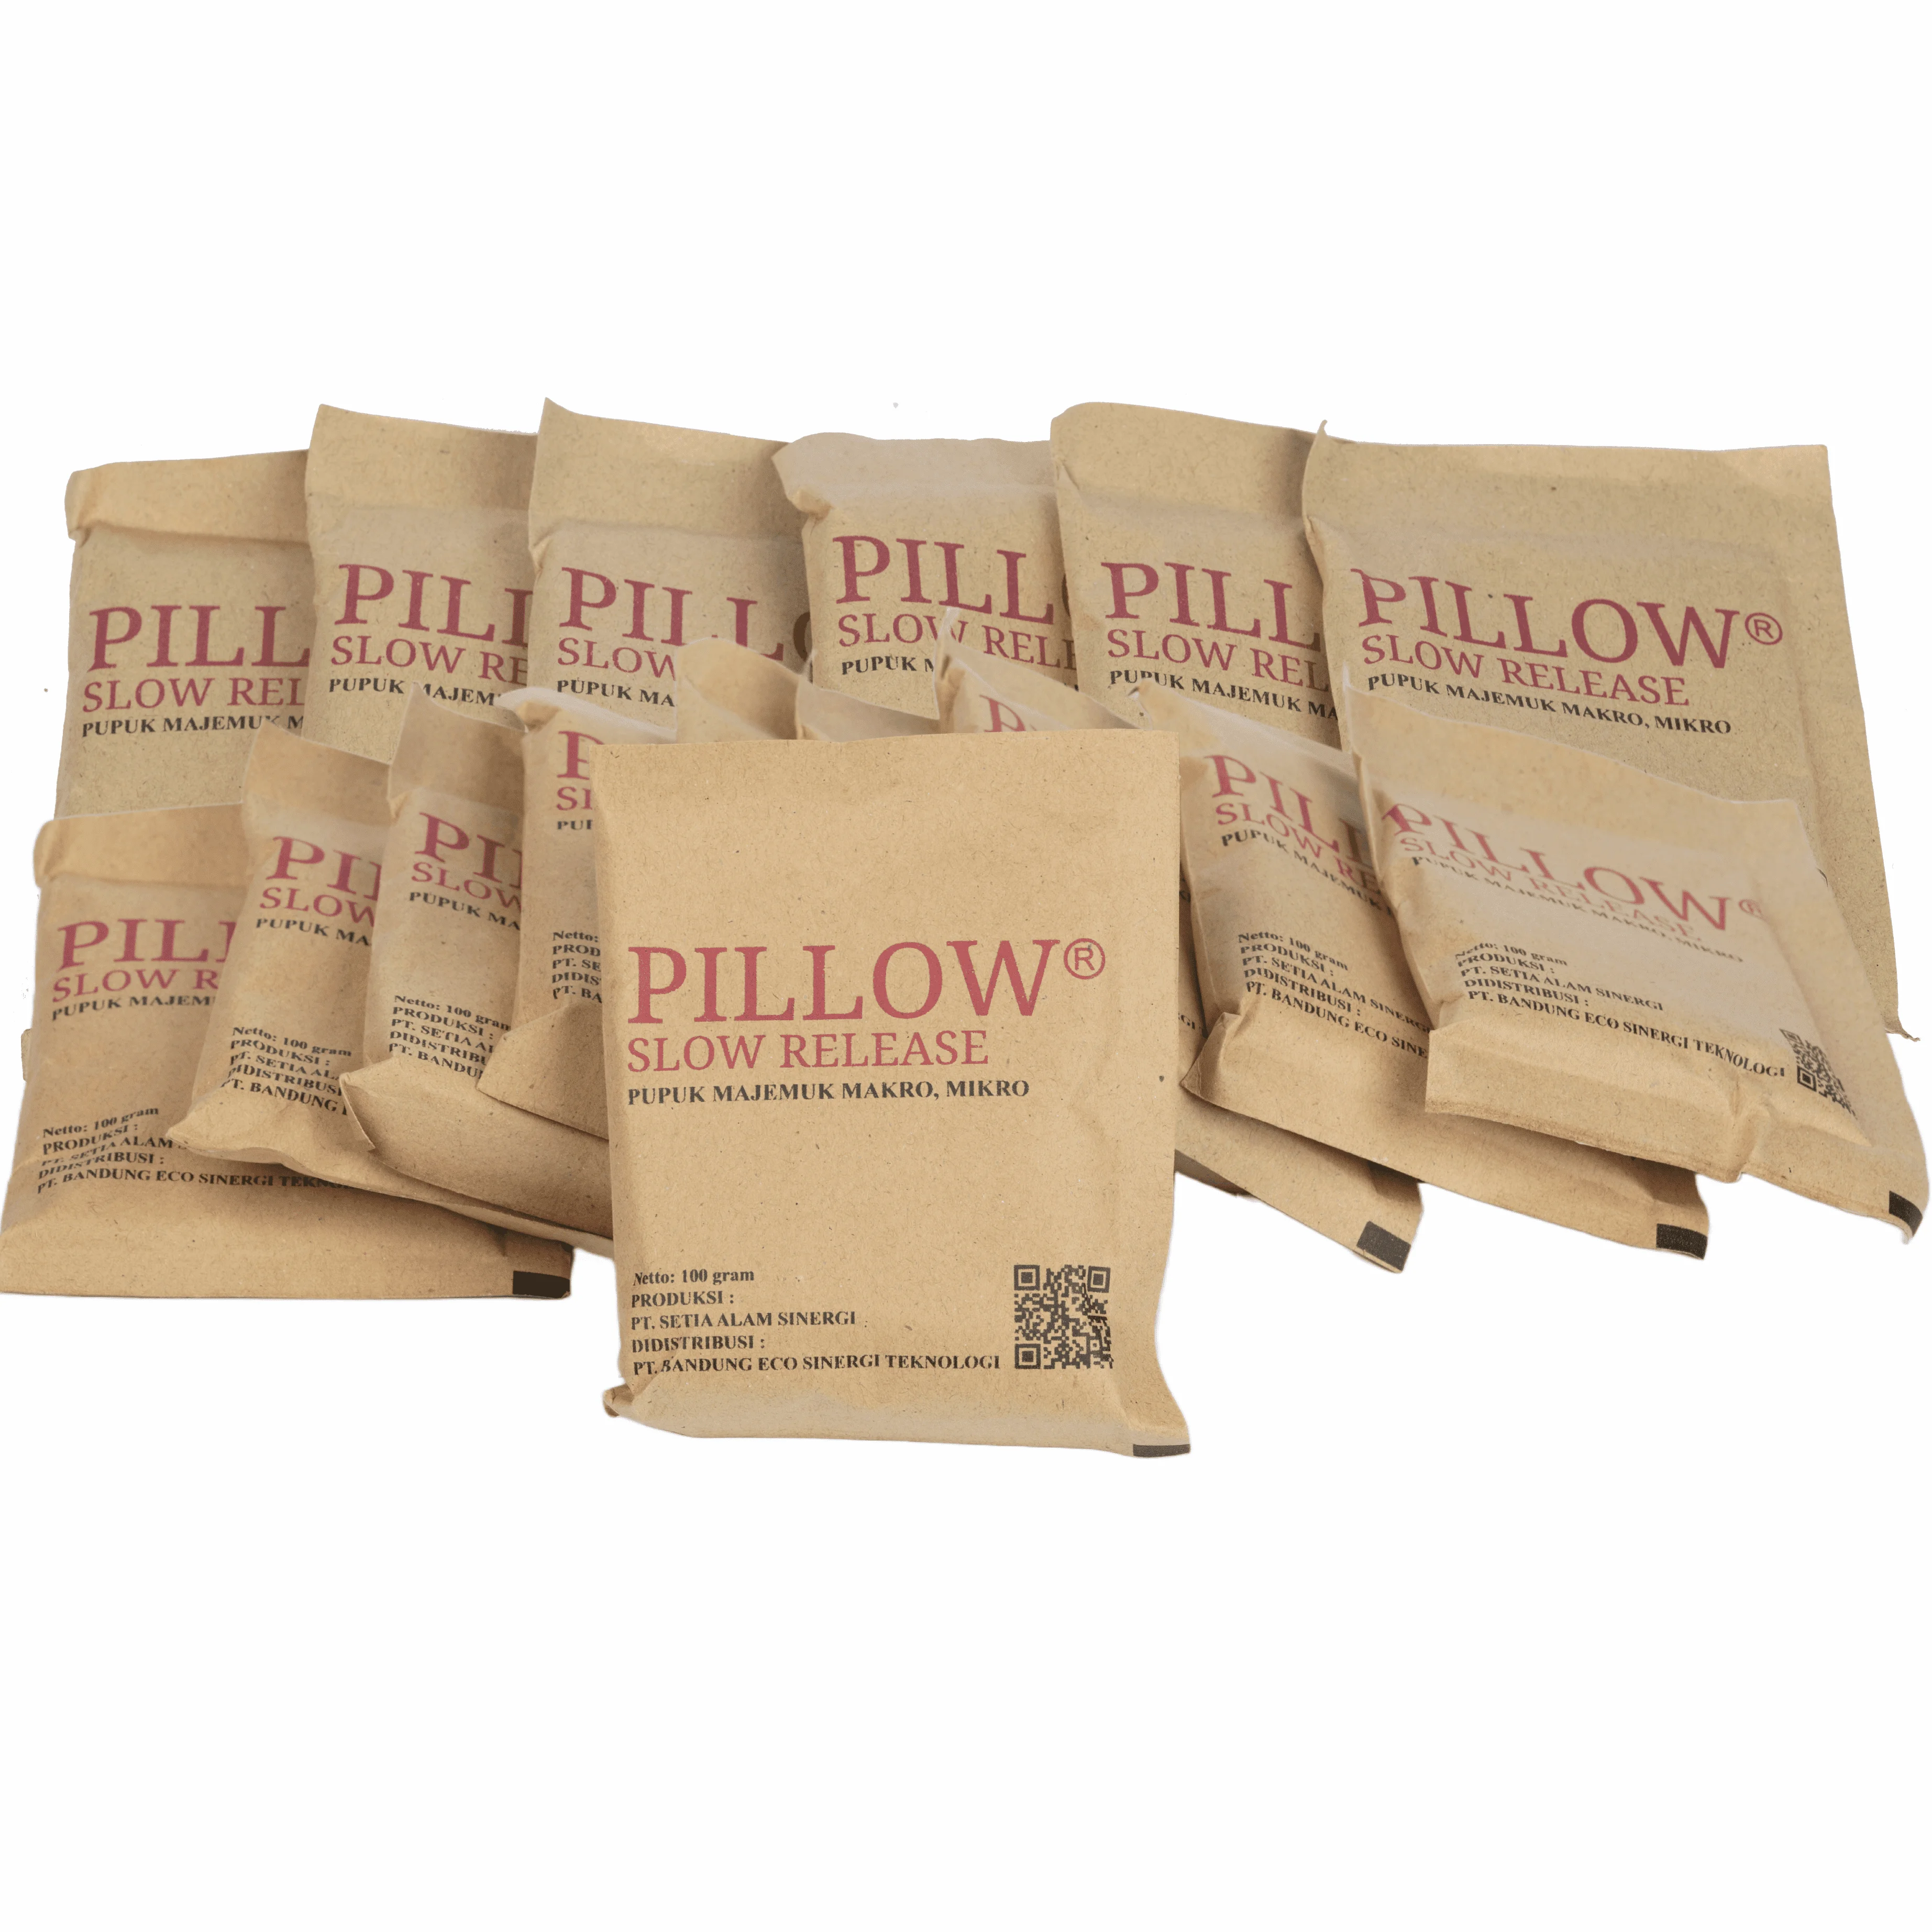 Pillow Slow Release